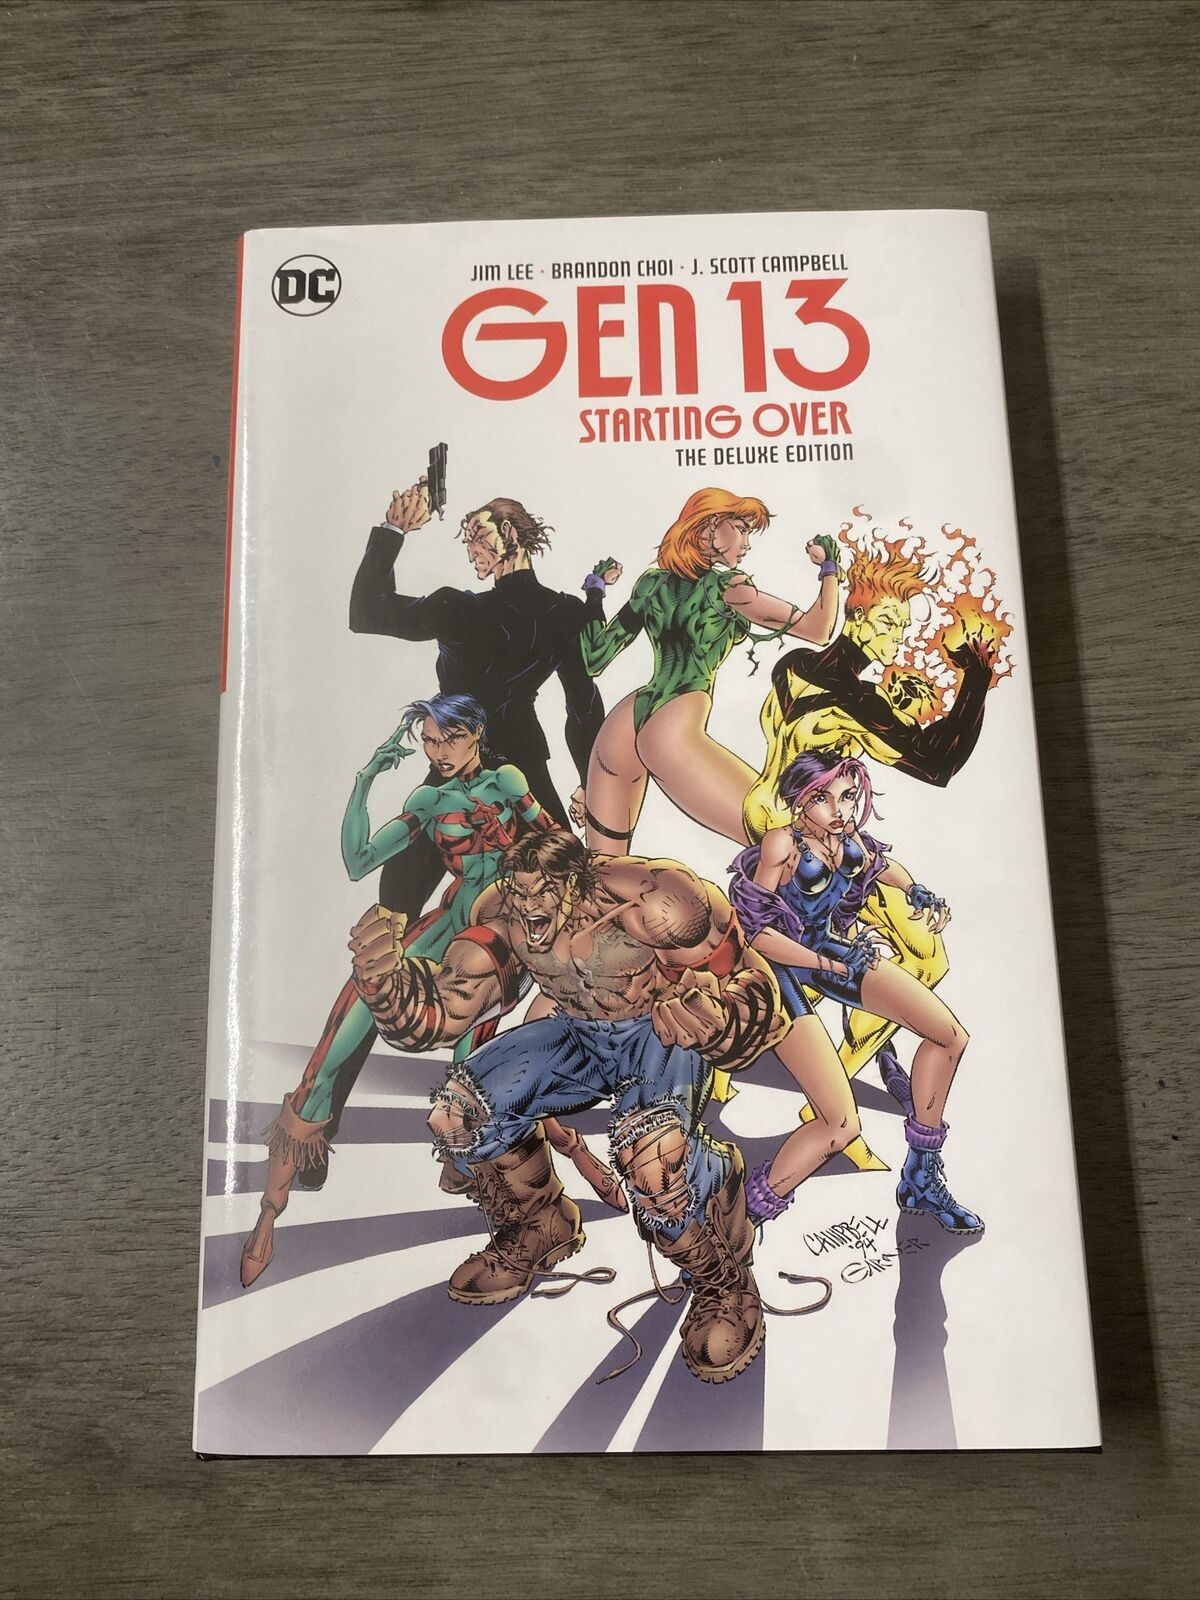 Gen 13: Starting Over The Deluxe Edition (DC Comics, Hardcover)